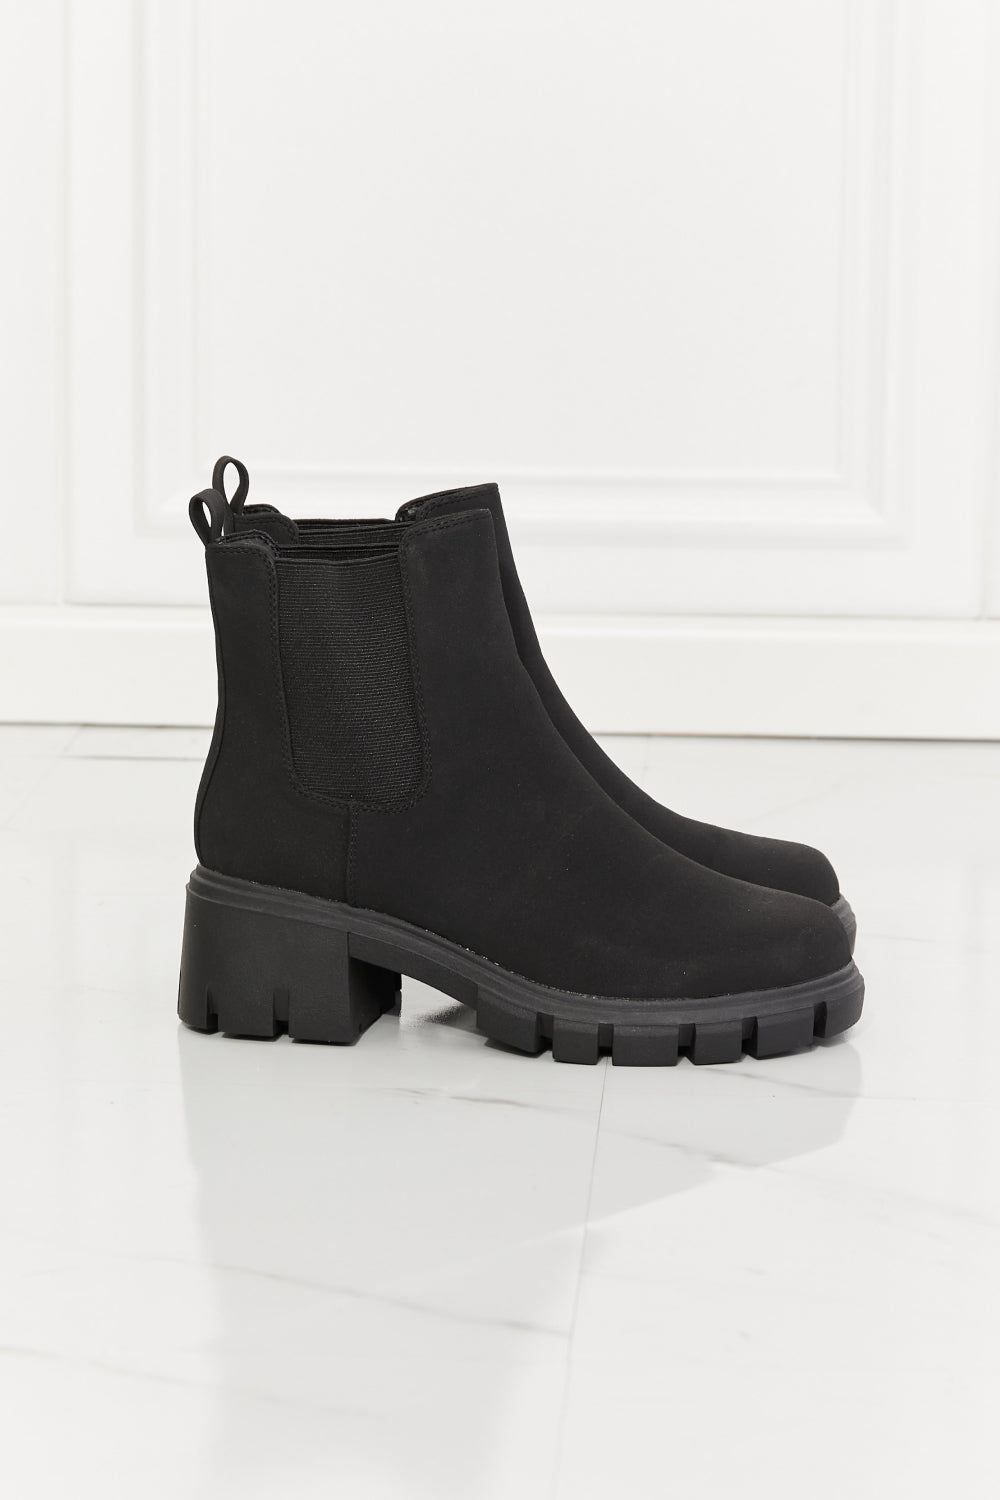 MMShoes Work For It Matte Lug Sole Chelsea Boots in Black - BEAUTY COSMOTICS SHOP